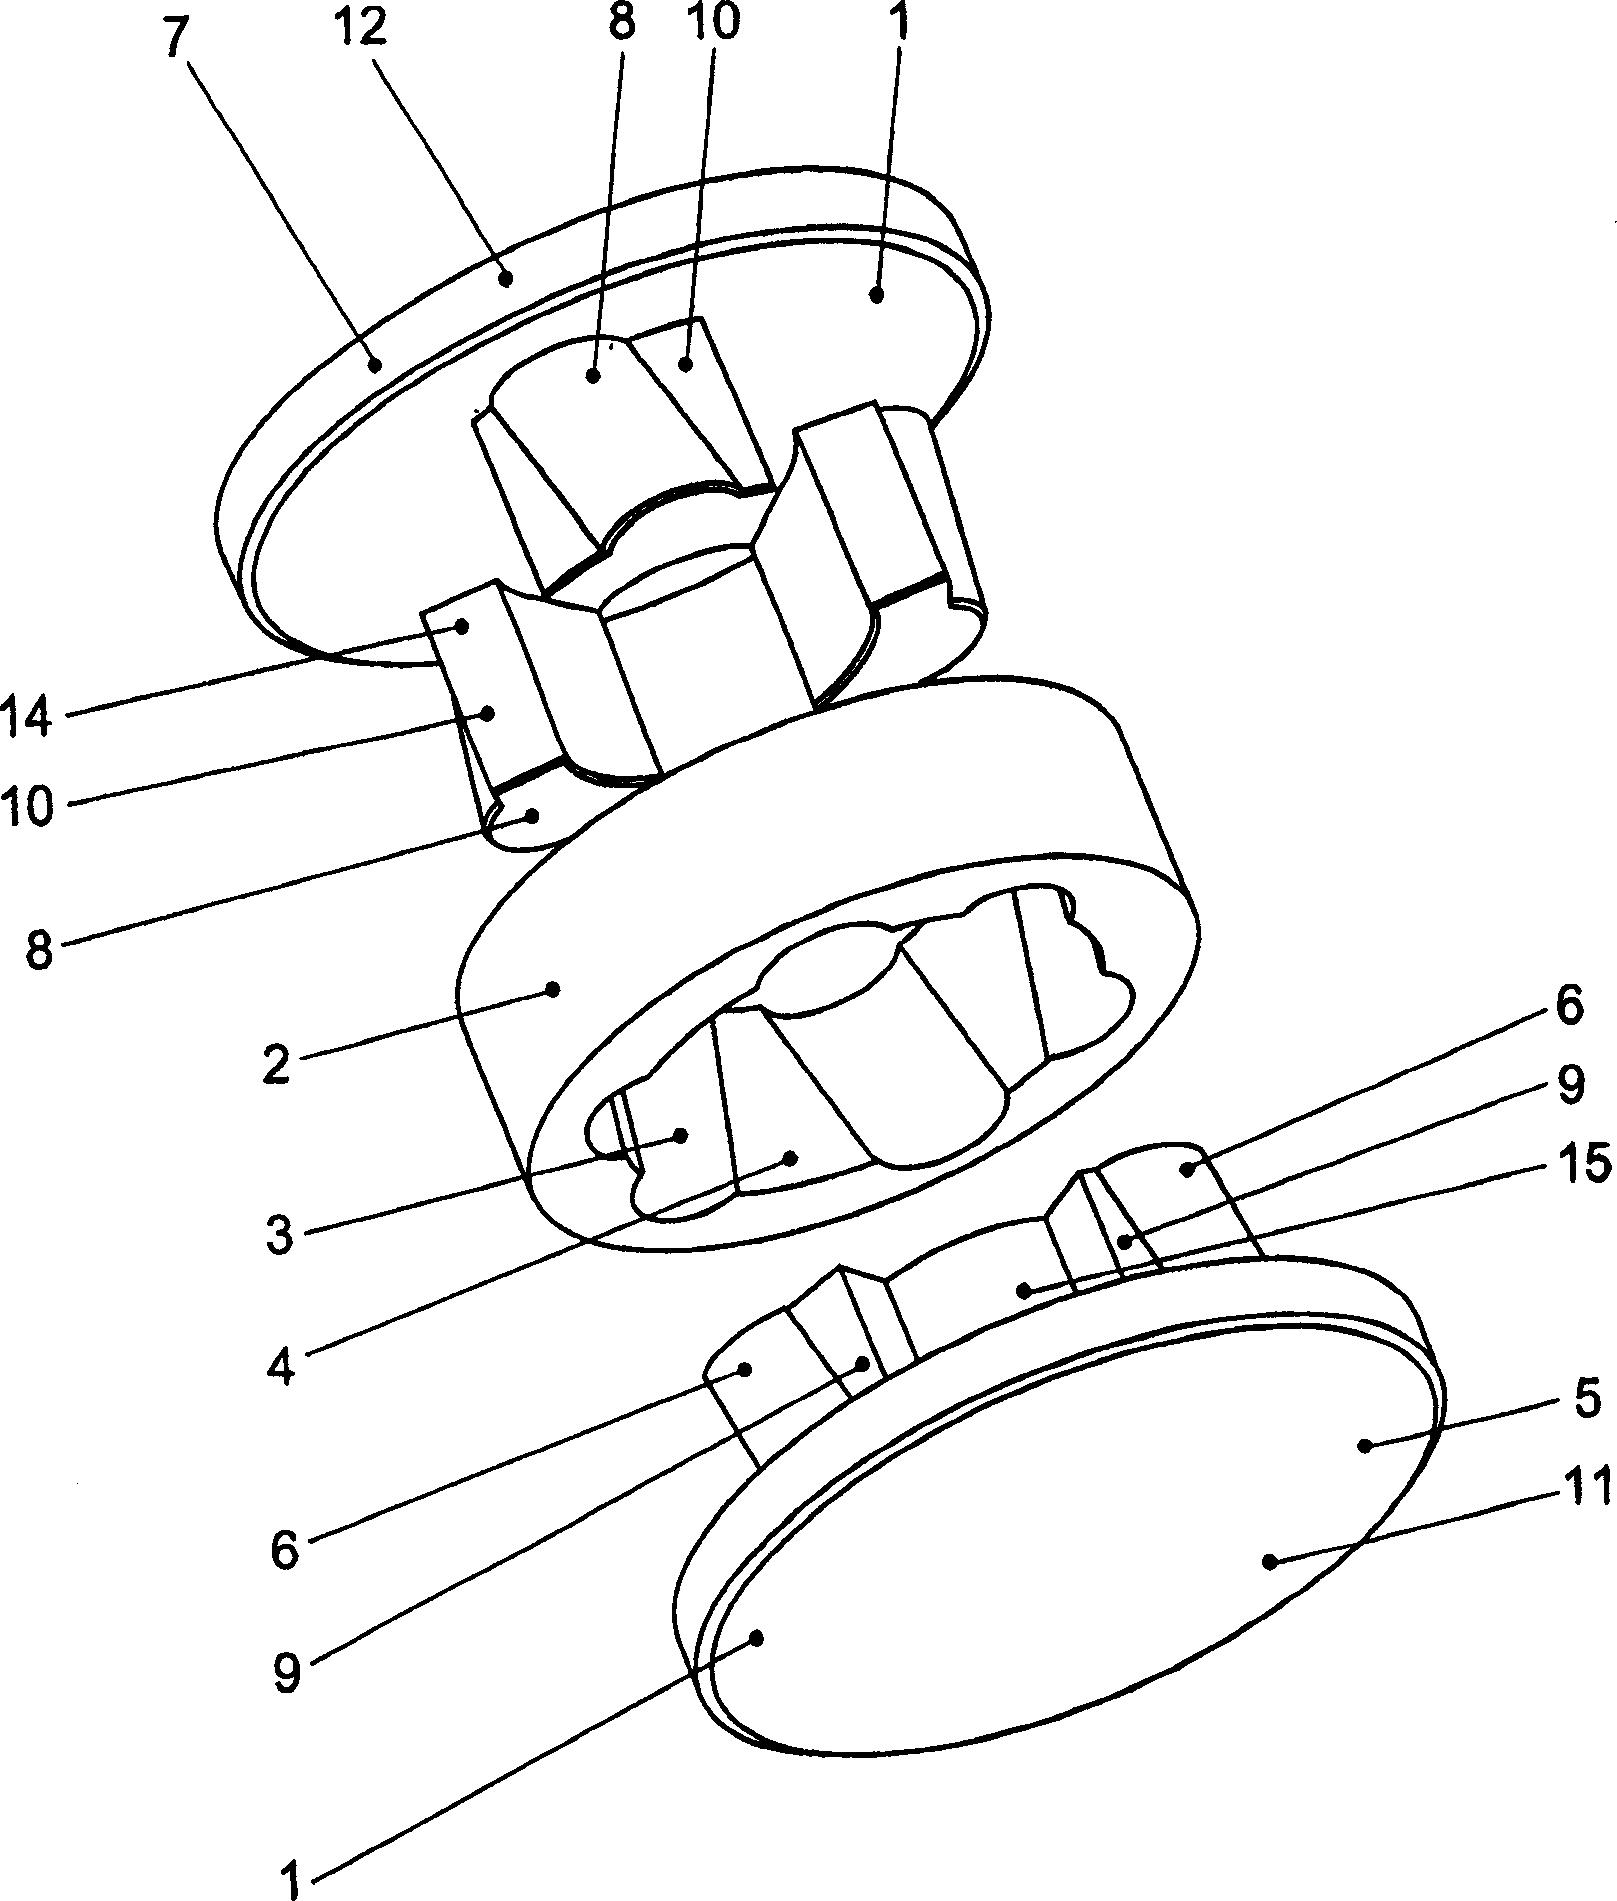 Apparatus and method for making spiral rollaway nest by pressure manufacturing or shaping